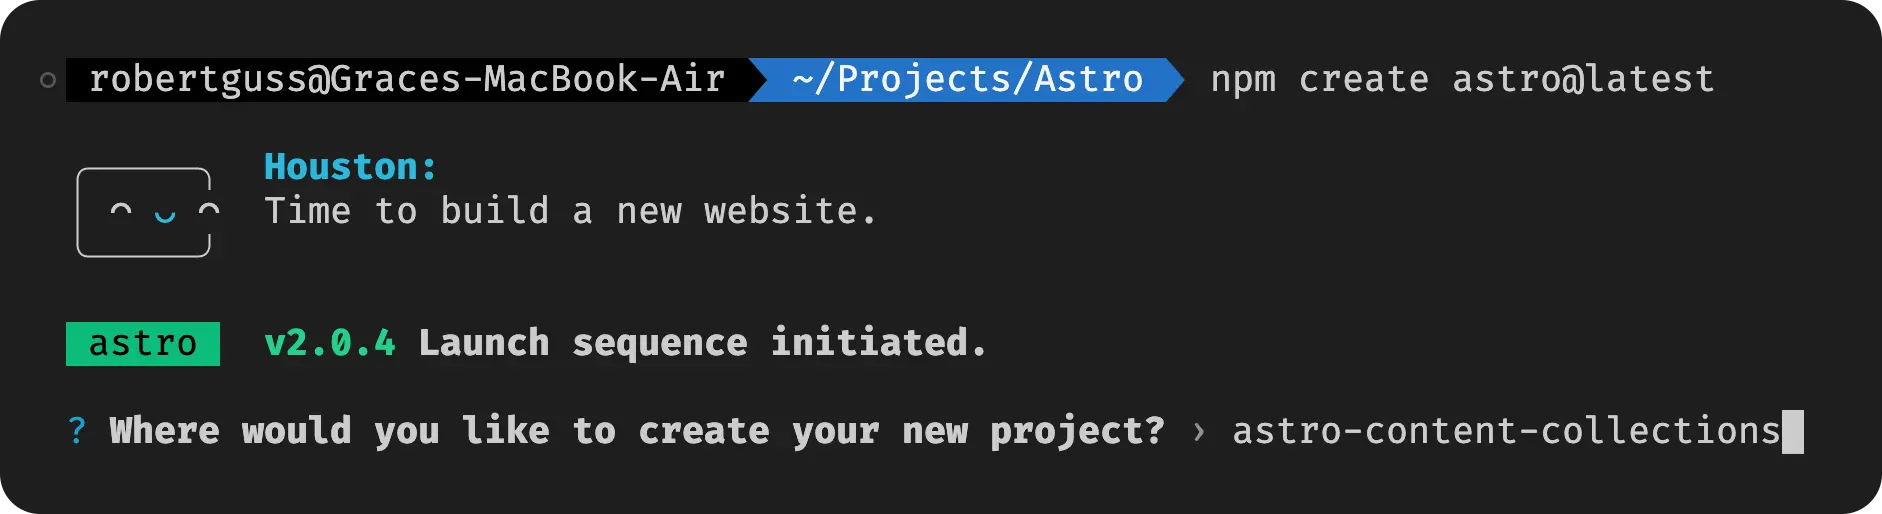 astro-project-name.png